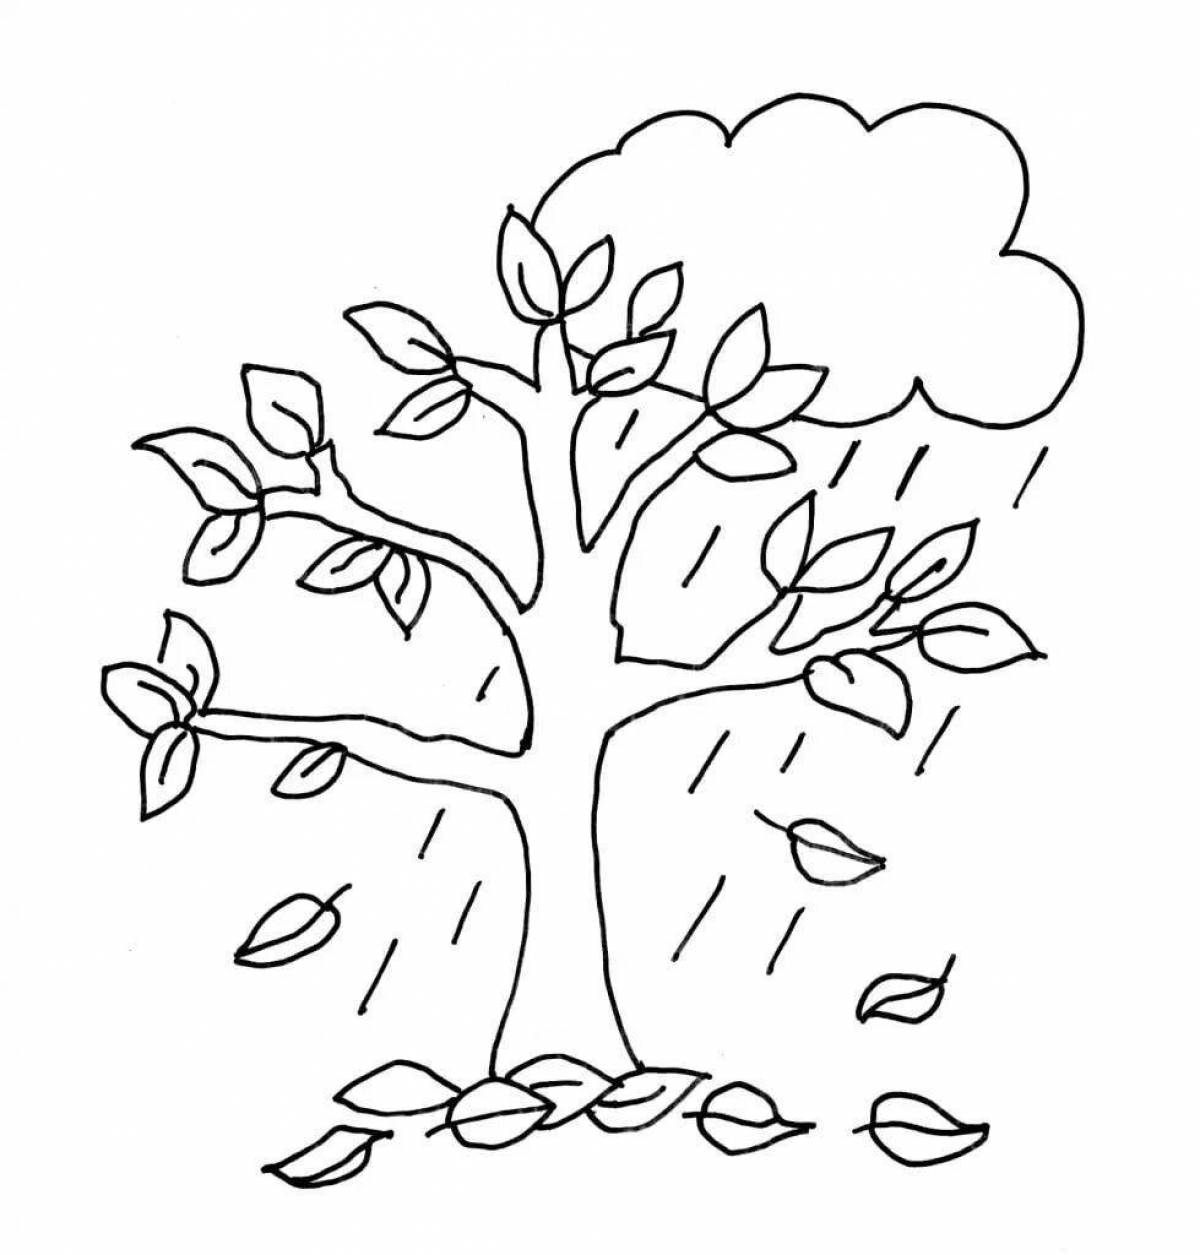 Blissful autumn forest coloring page